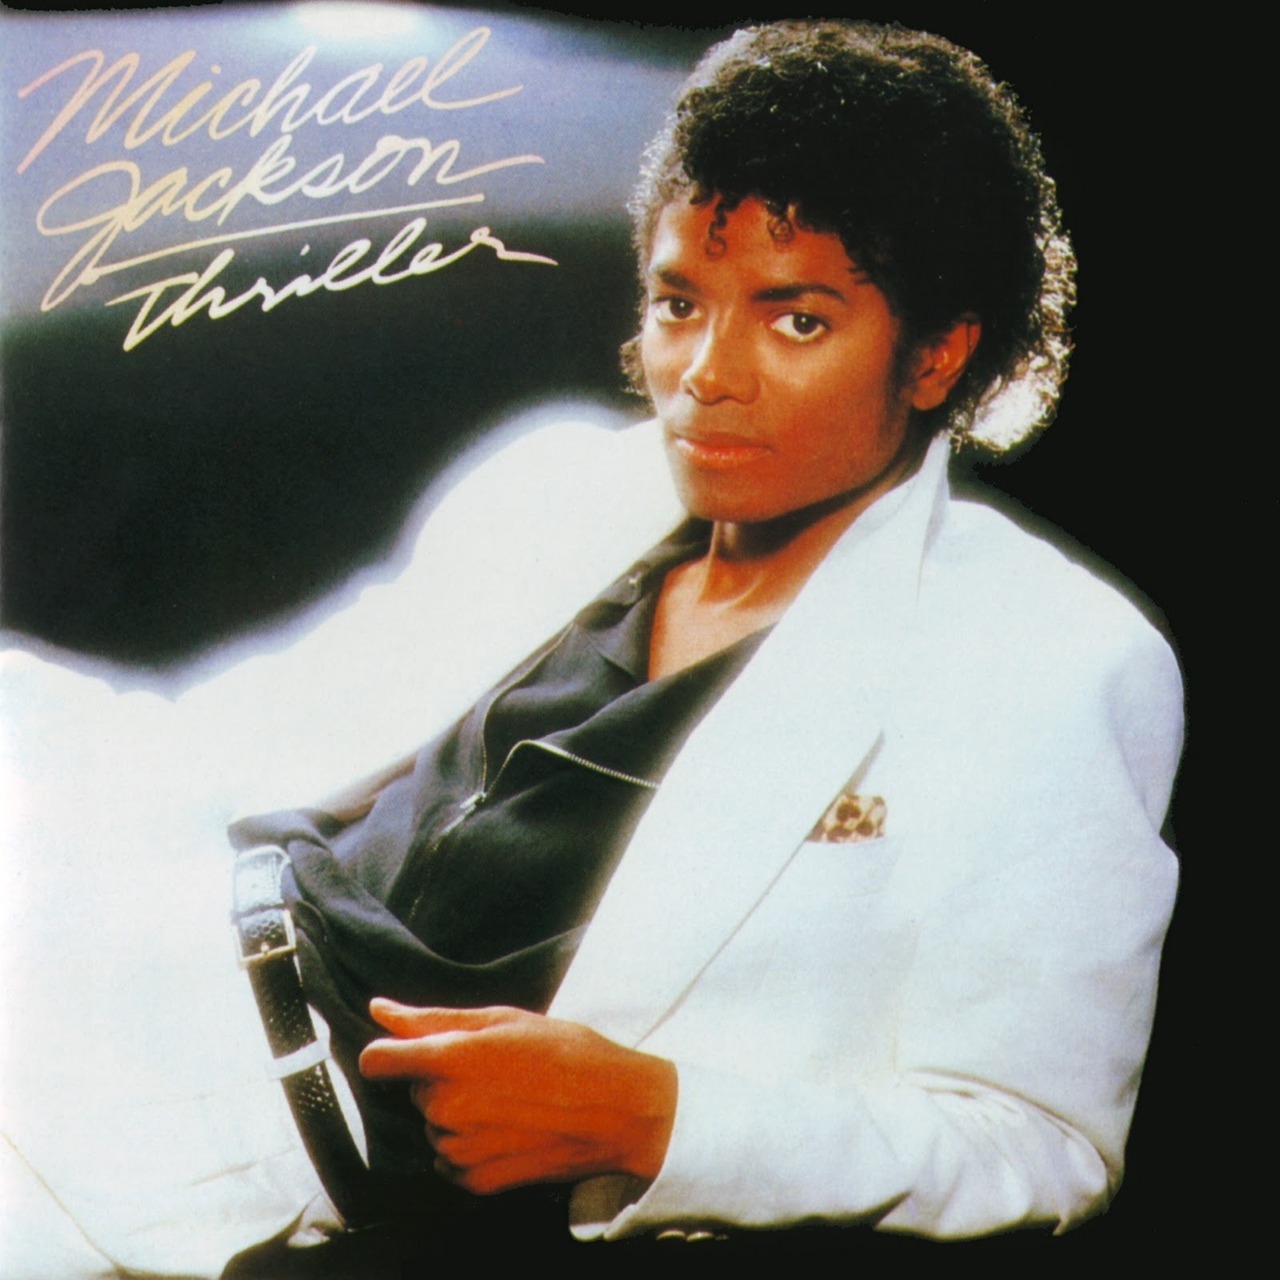 30 YEARS AGO TODAY |11/30/82| Michael Jackson released his sixth album, Thriller,